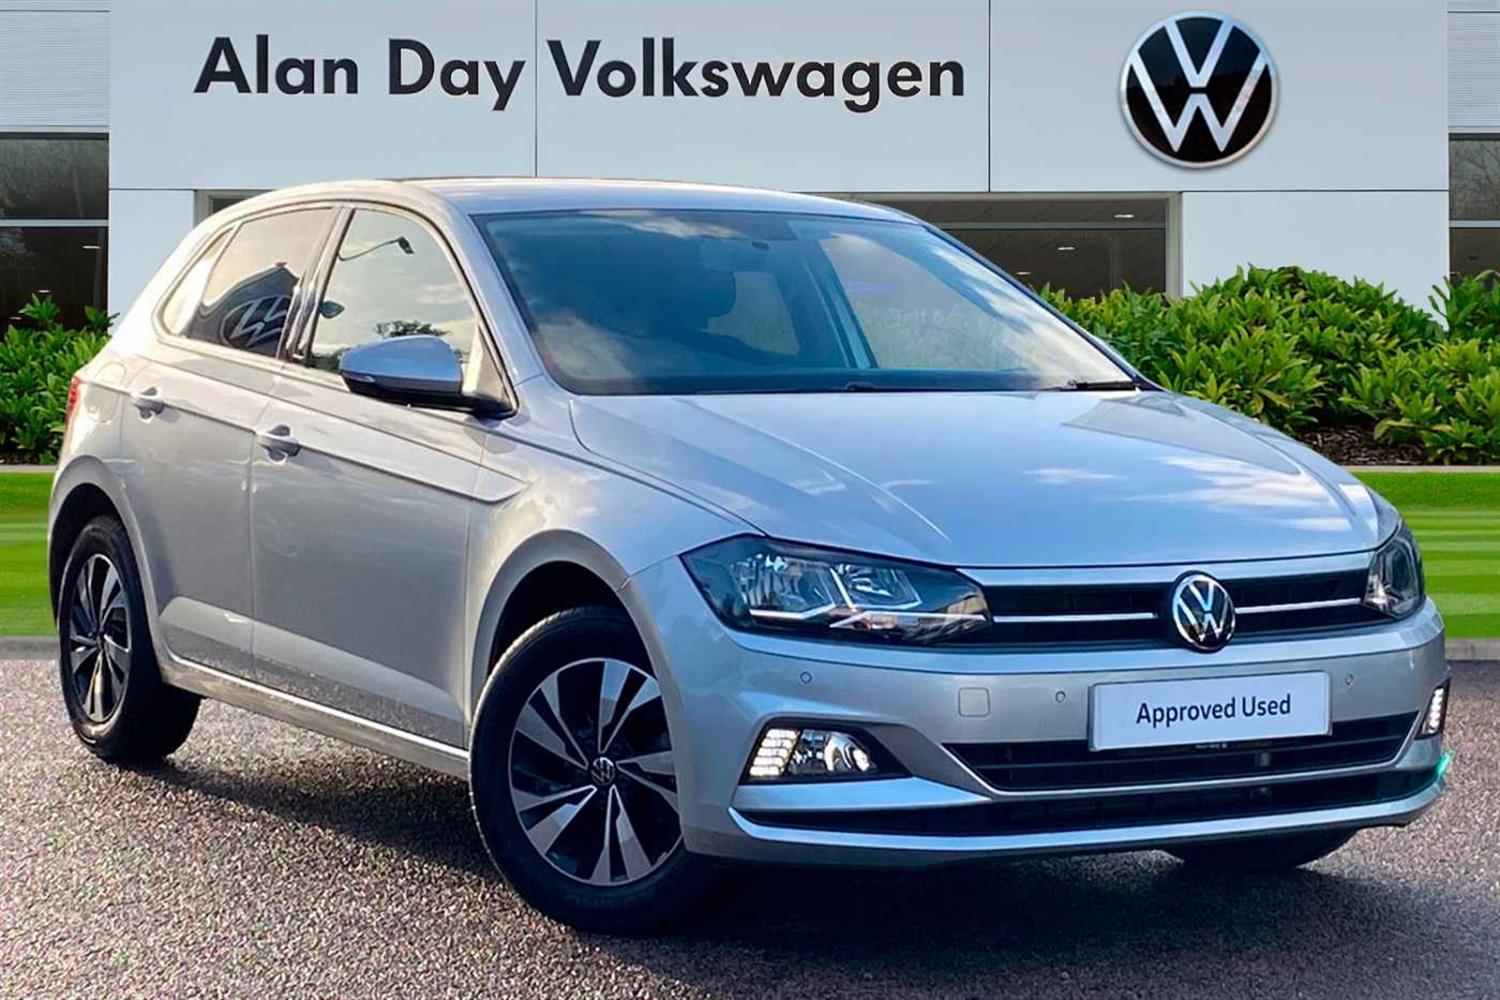 Alan Day Group - 2021 Volkswagen Polo 1.0 TSI 95PS Match | Alan Day Group